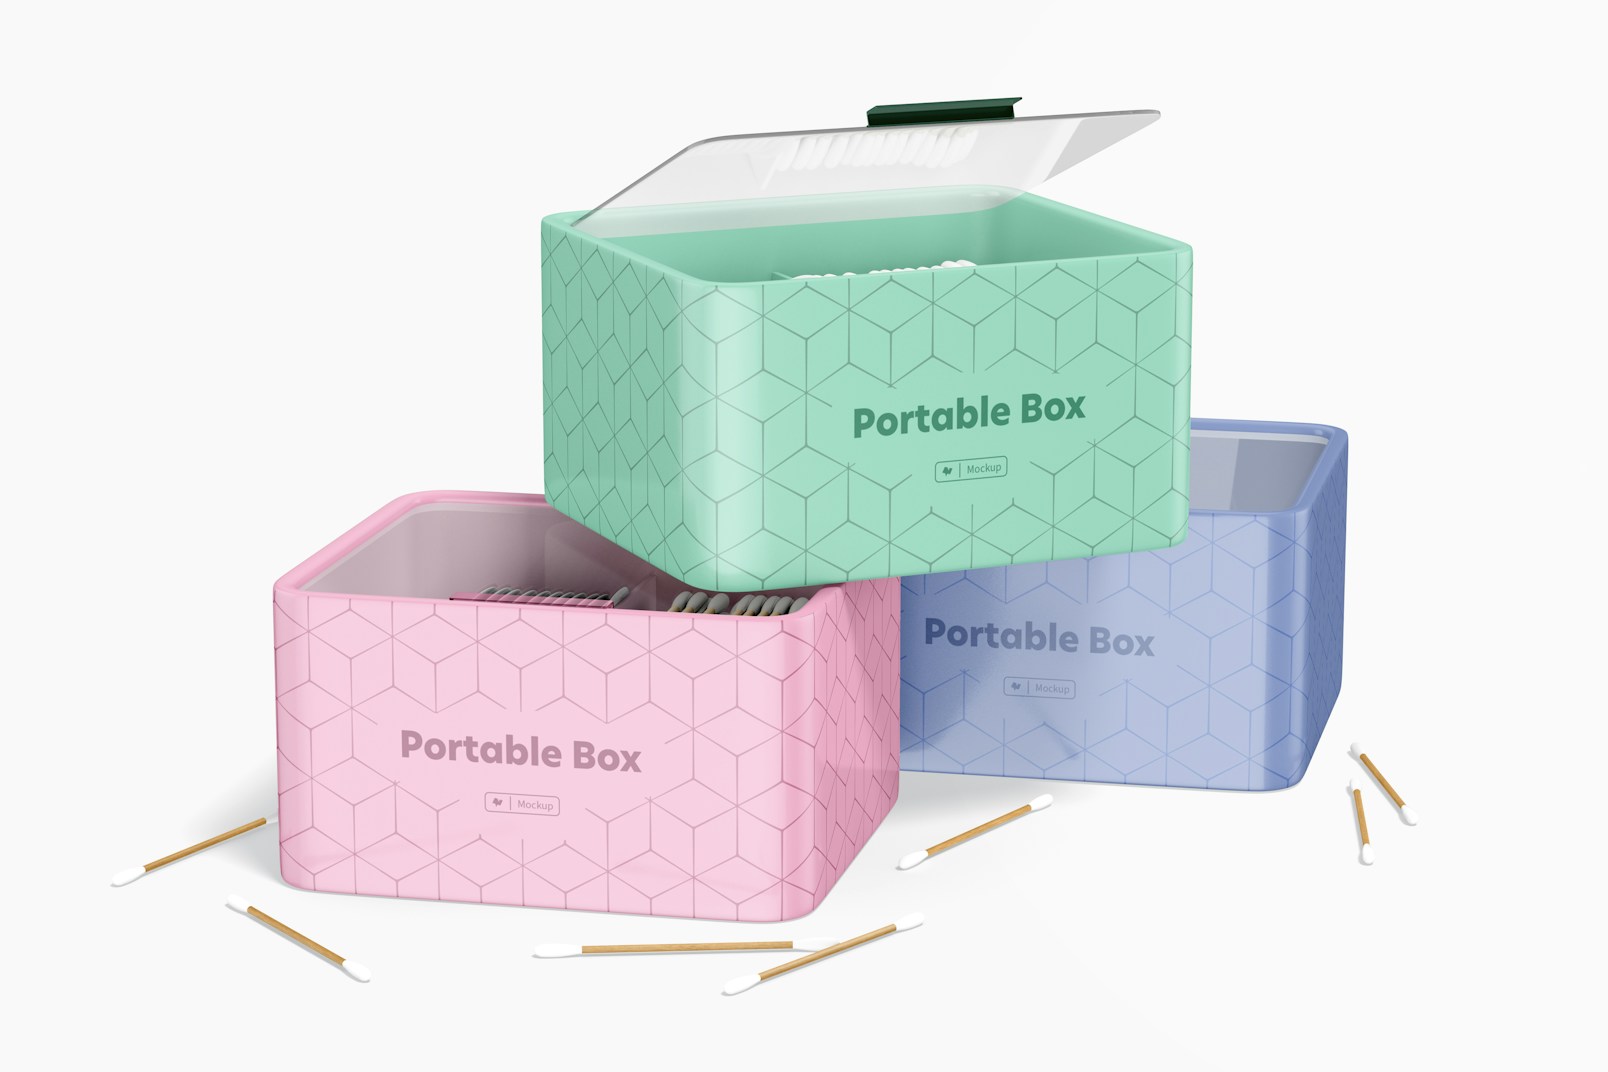 Portable Boxes with Clear Lid Mockup, Stacked 02